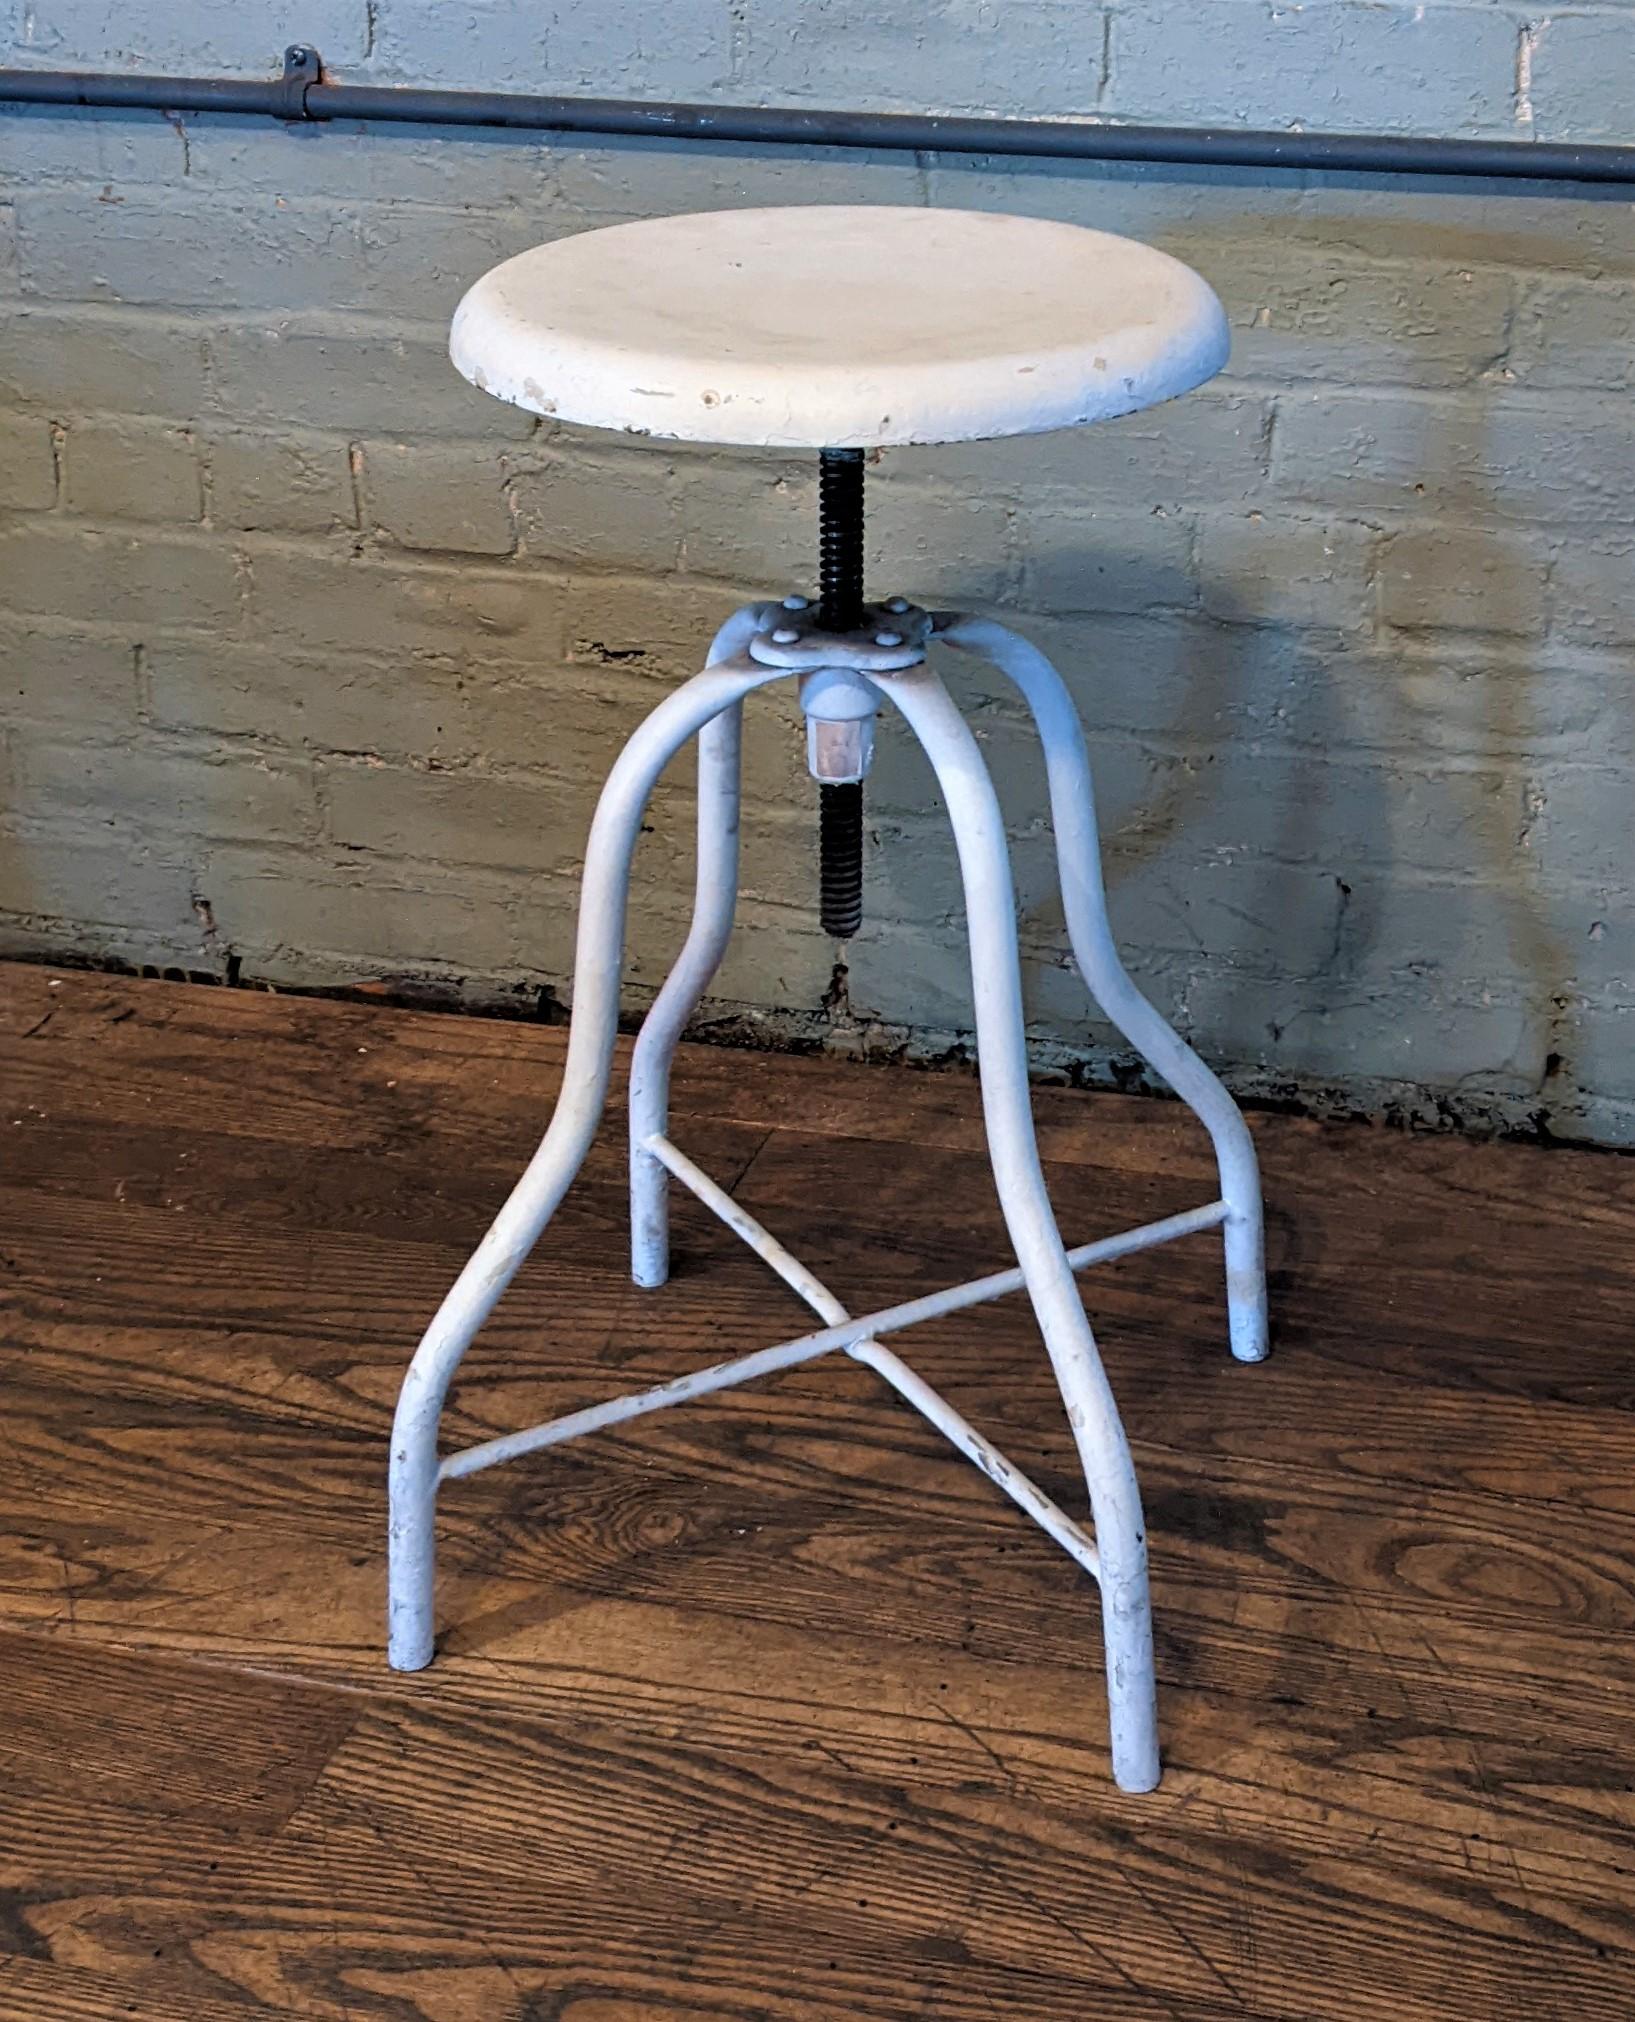 Vintage medical stool.

Overall dimensions: 13 1/2